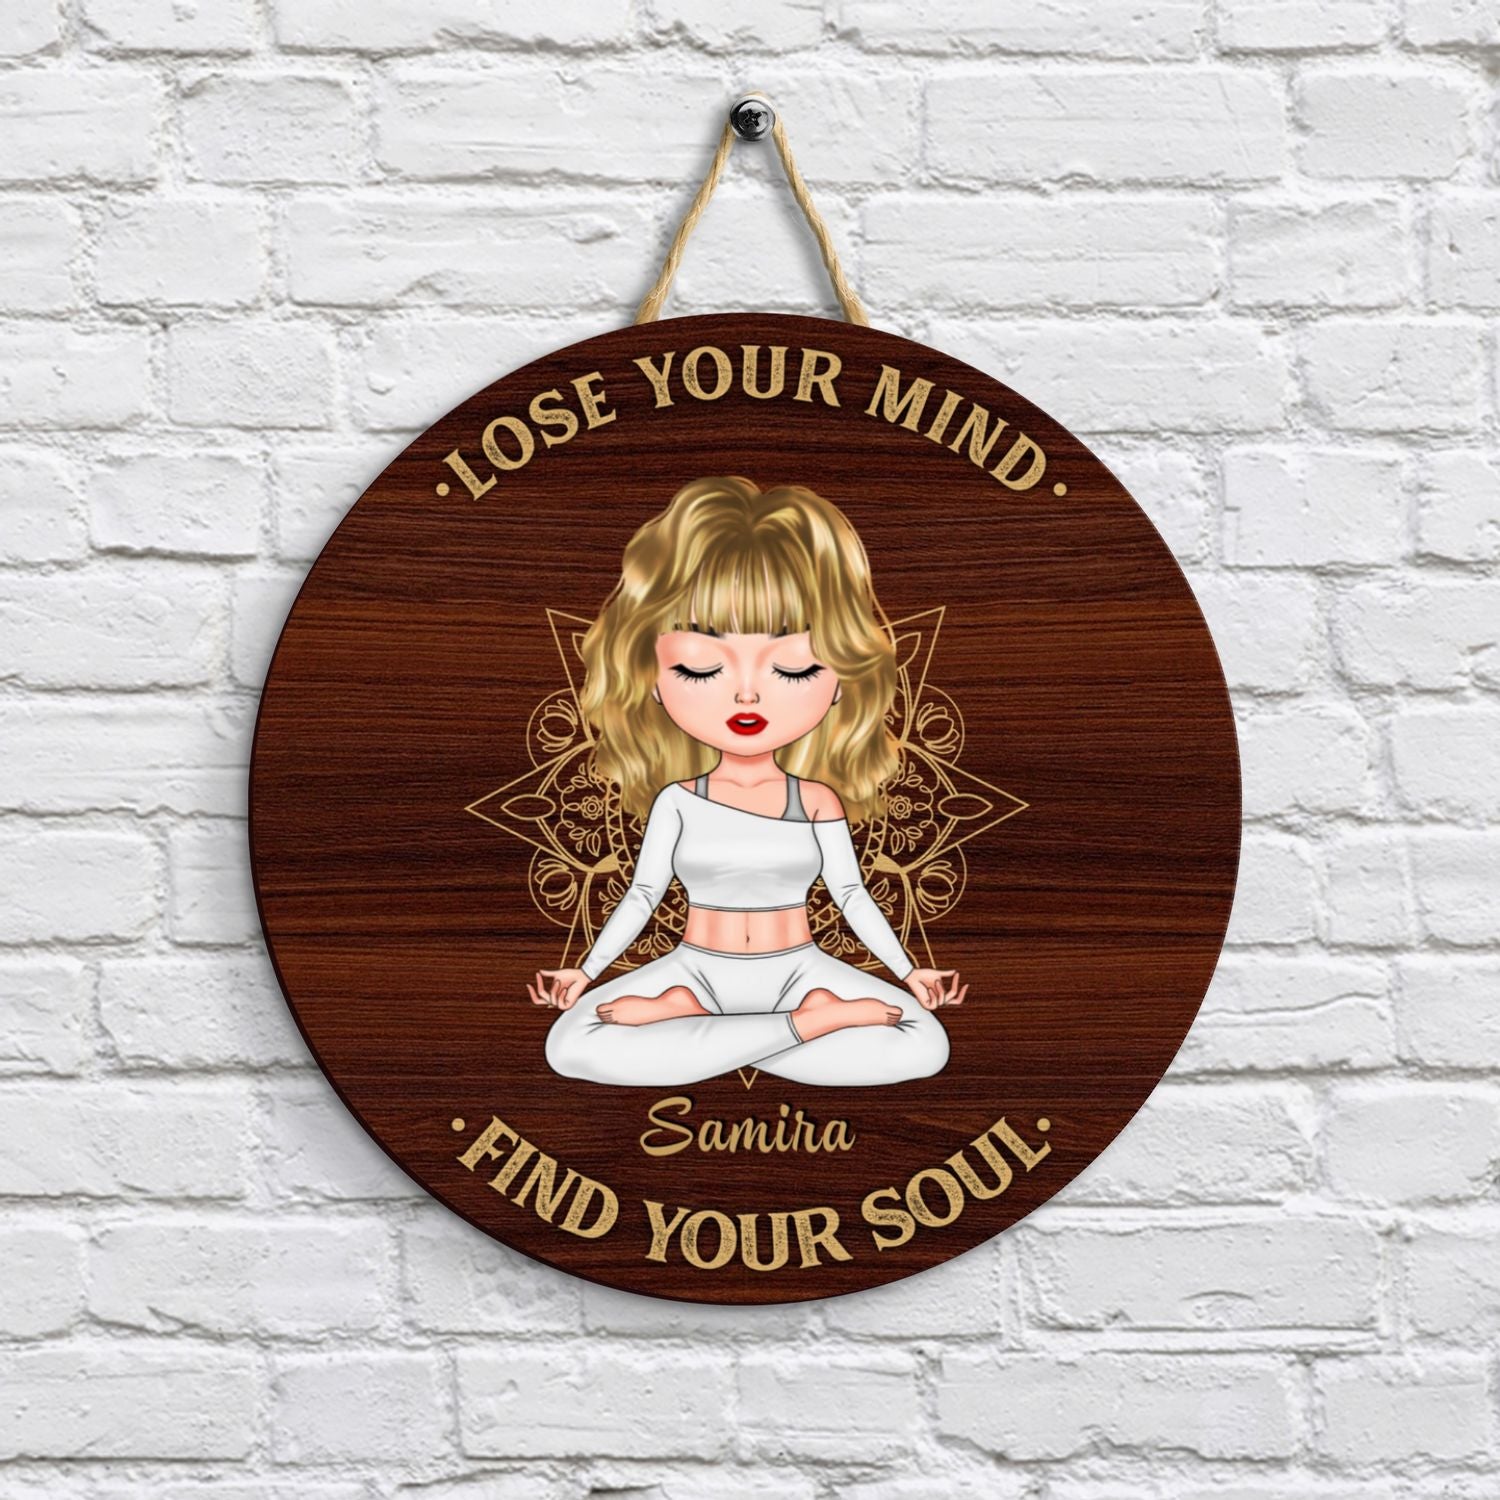 Personalized Door Sign - Gift For Yoga Lover - Lose Your Mind Find Your Soul